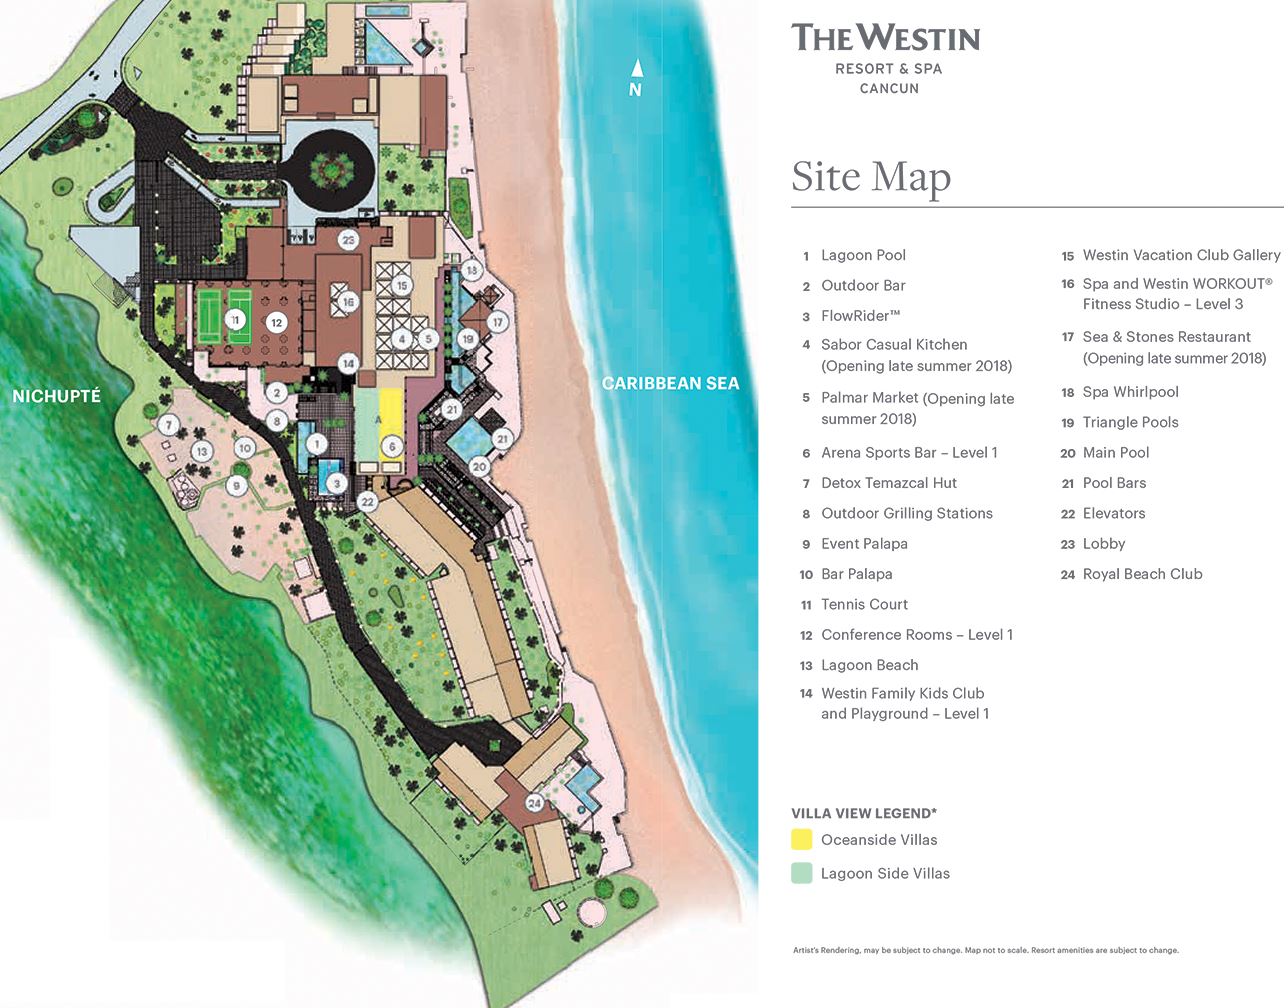 Resort Map | The Westin Resort & Spa | Cancun, Mexico